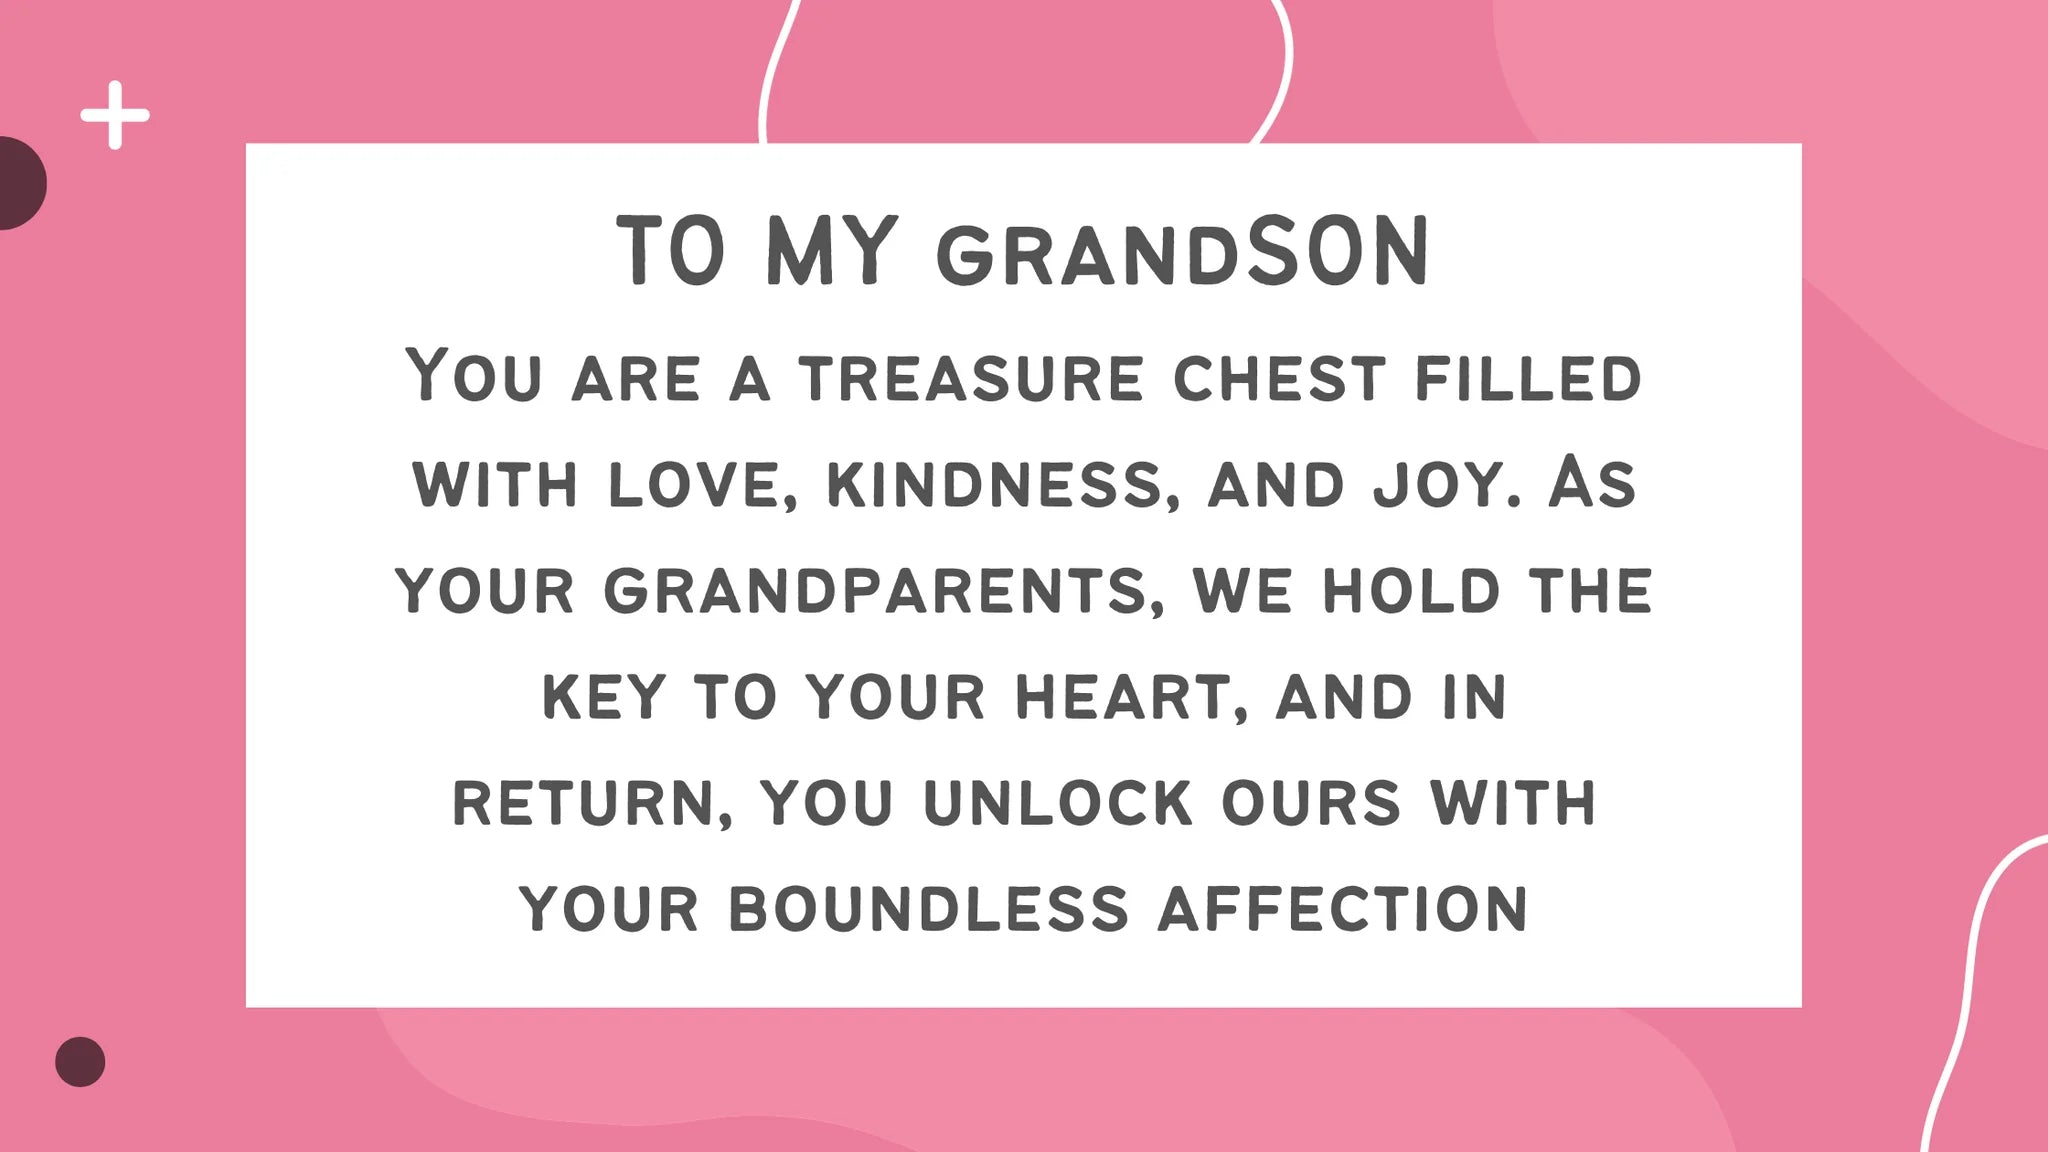 10 Heartwarming Messages to My Grandson from His Loving Grandparents